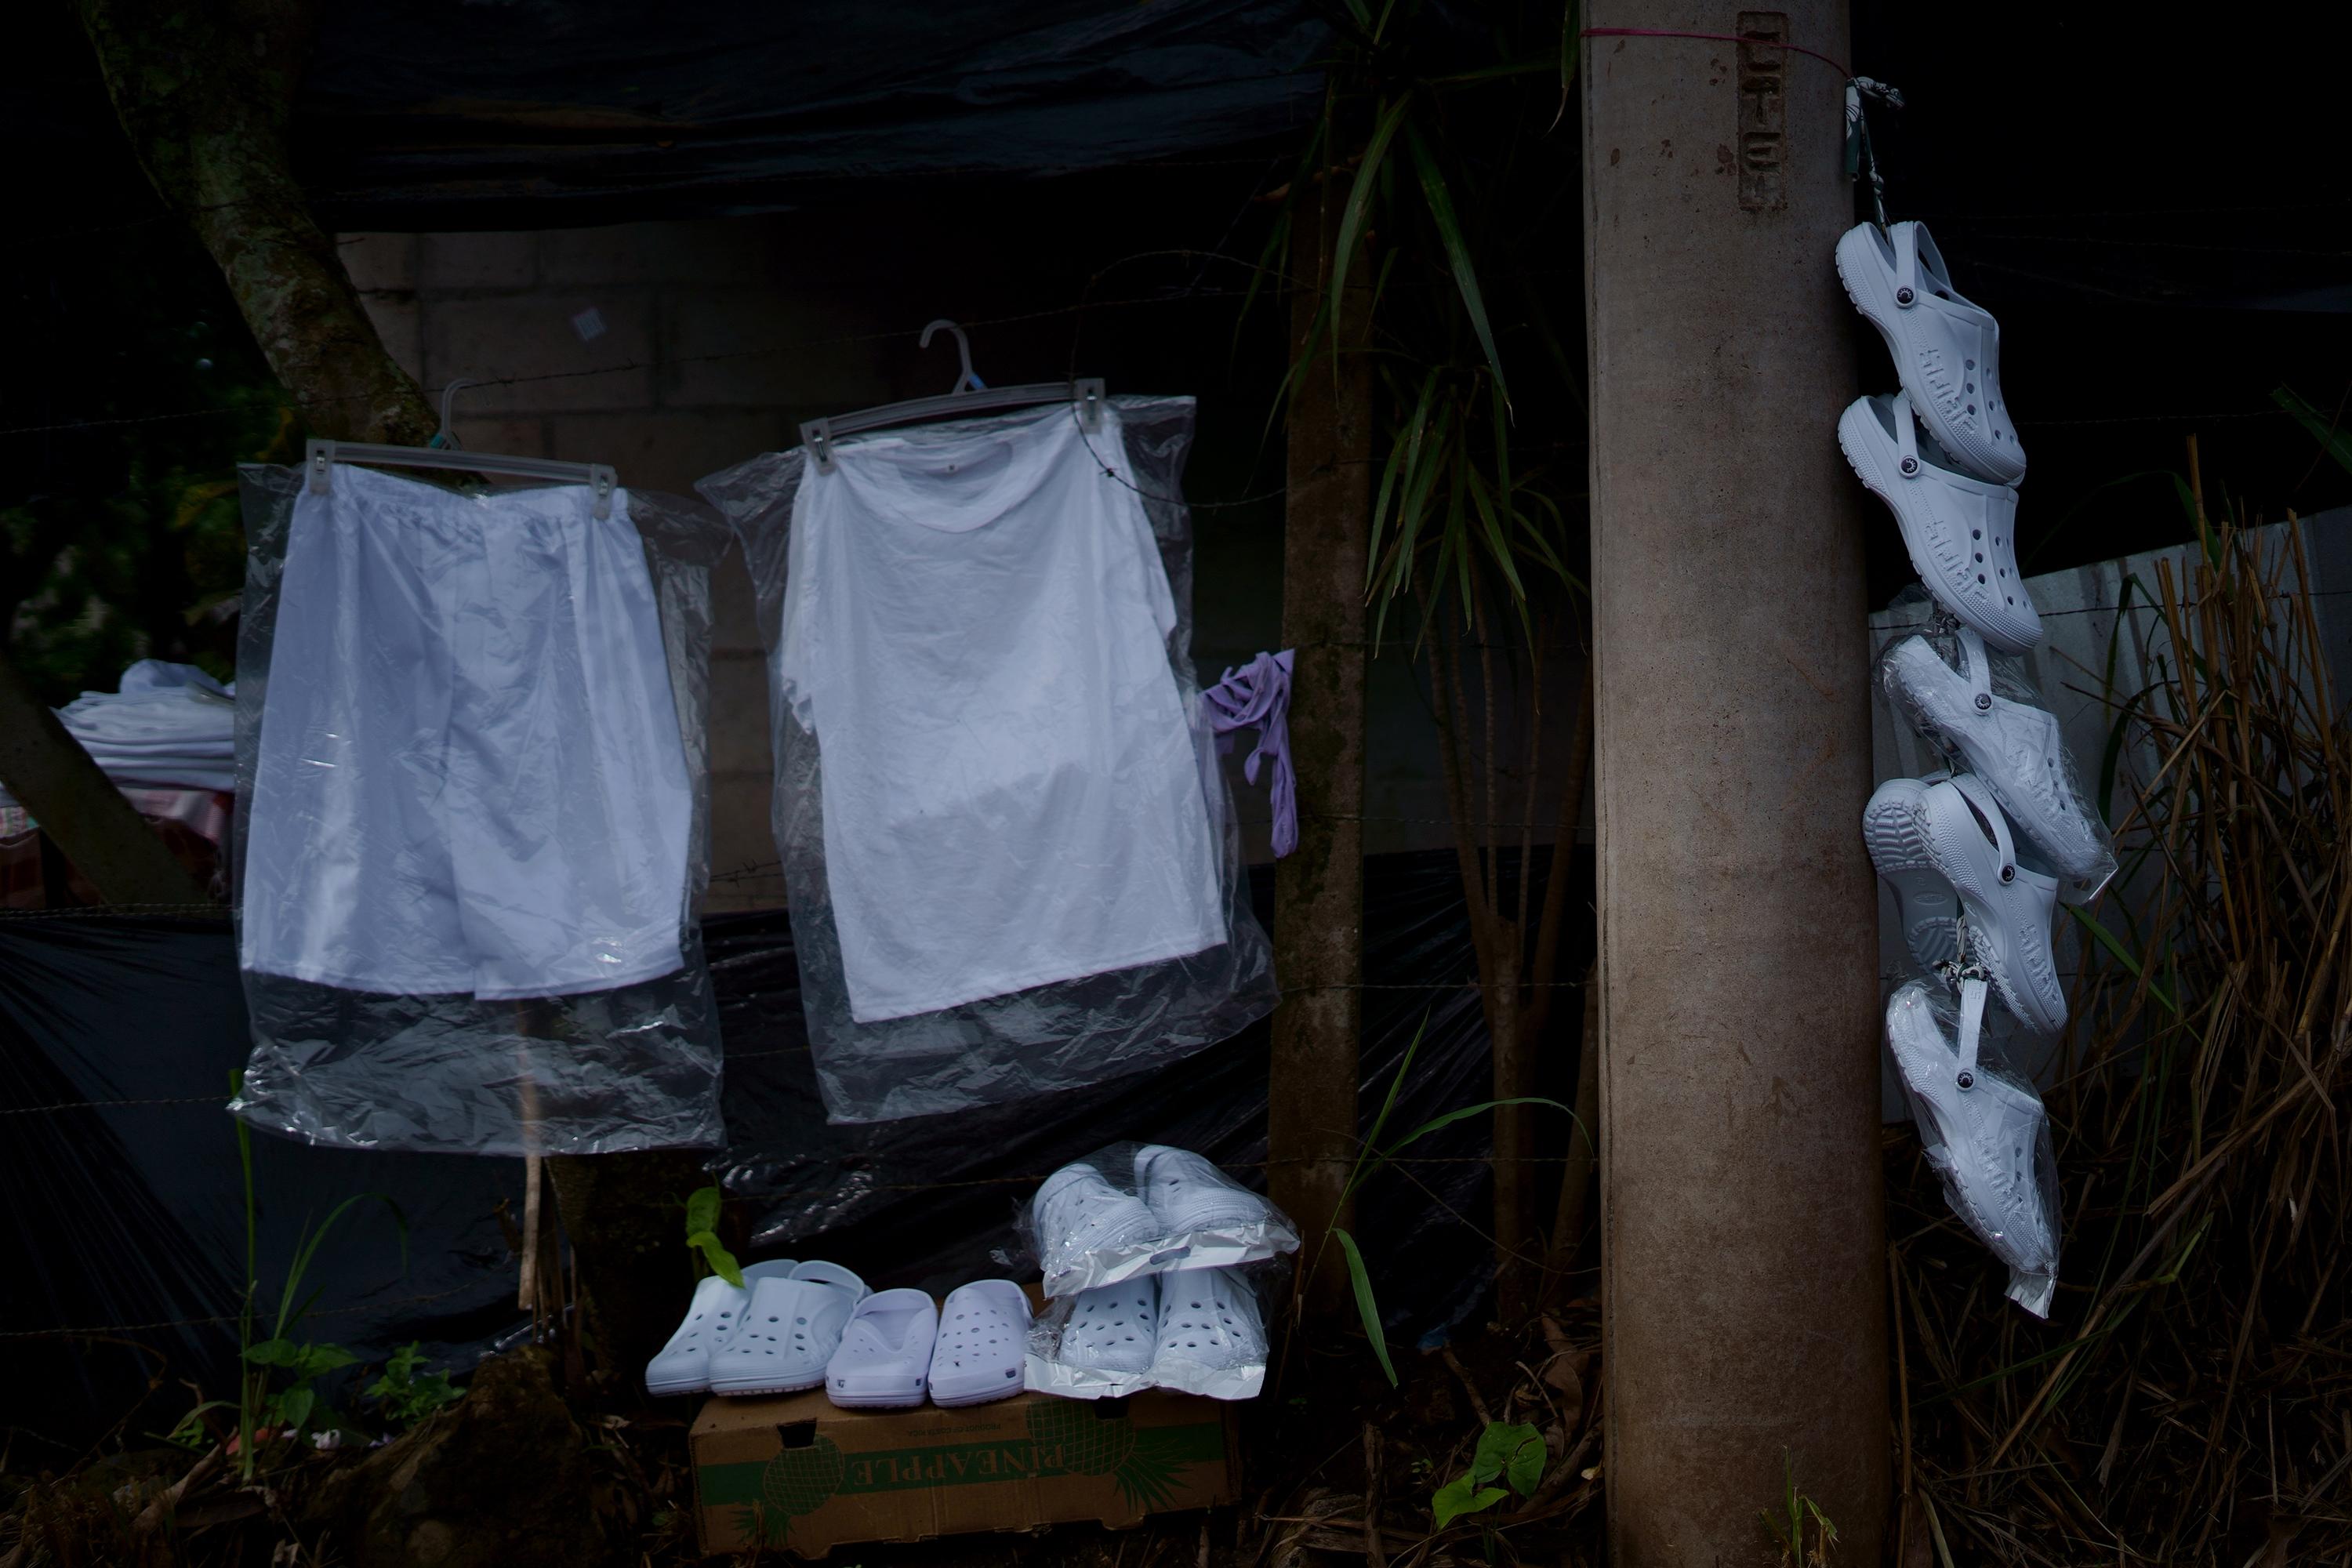 Outside El Salvador’s prisons, scenes like this have become increasingly common since the beginning of the state of exception. Demand is high, and each seller has their own special bargain: $50 gets you a package with two pairs of underwear, two shorts, two shirts, two pairs of socks, two bars of soap, two bars of laundry soap, one bag of Rinso detergent, two tubes of toothpaste, a toothbrush, one pair of Crocs and 12 rolls of toilet paper.